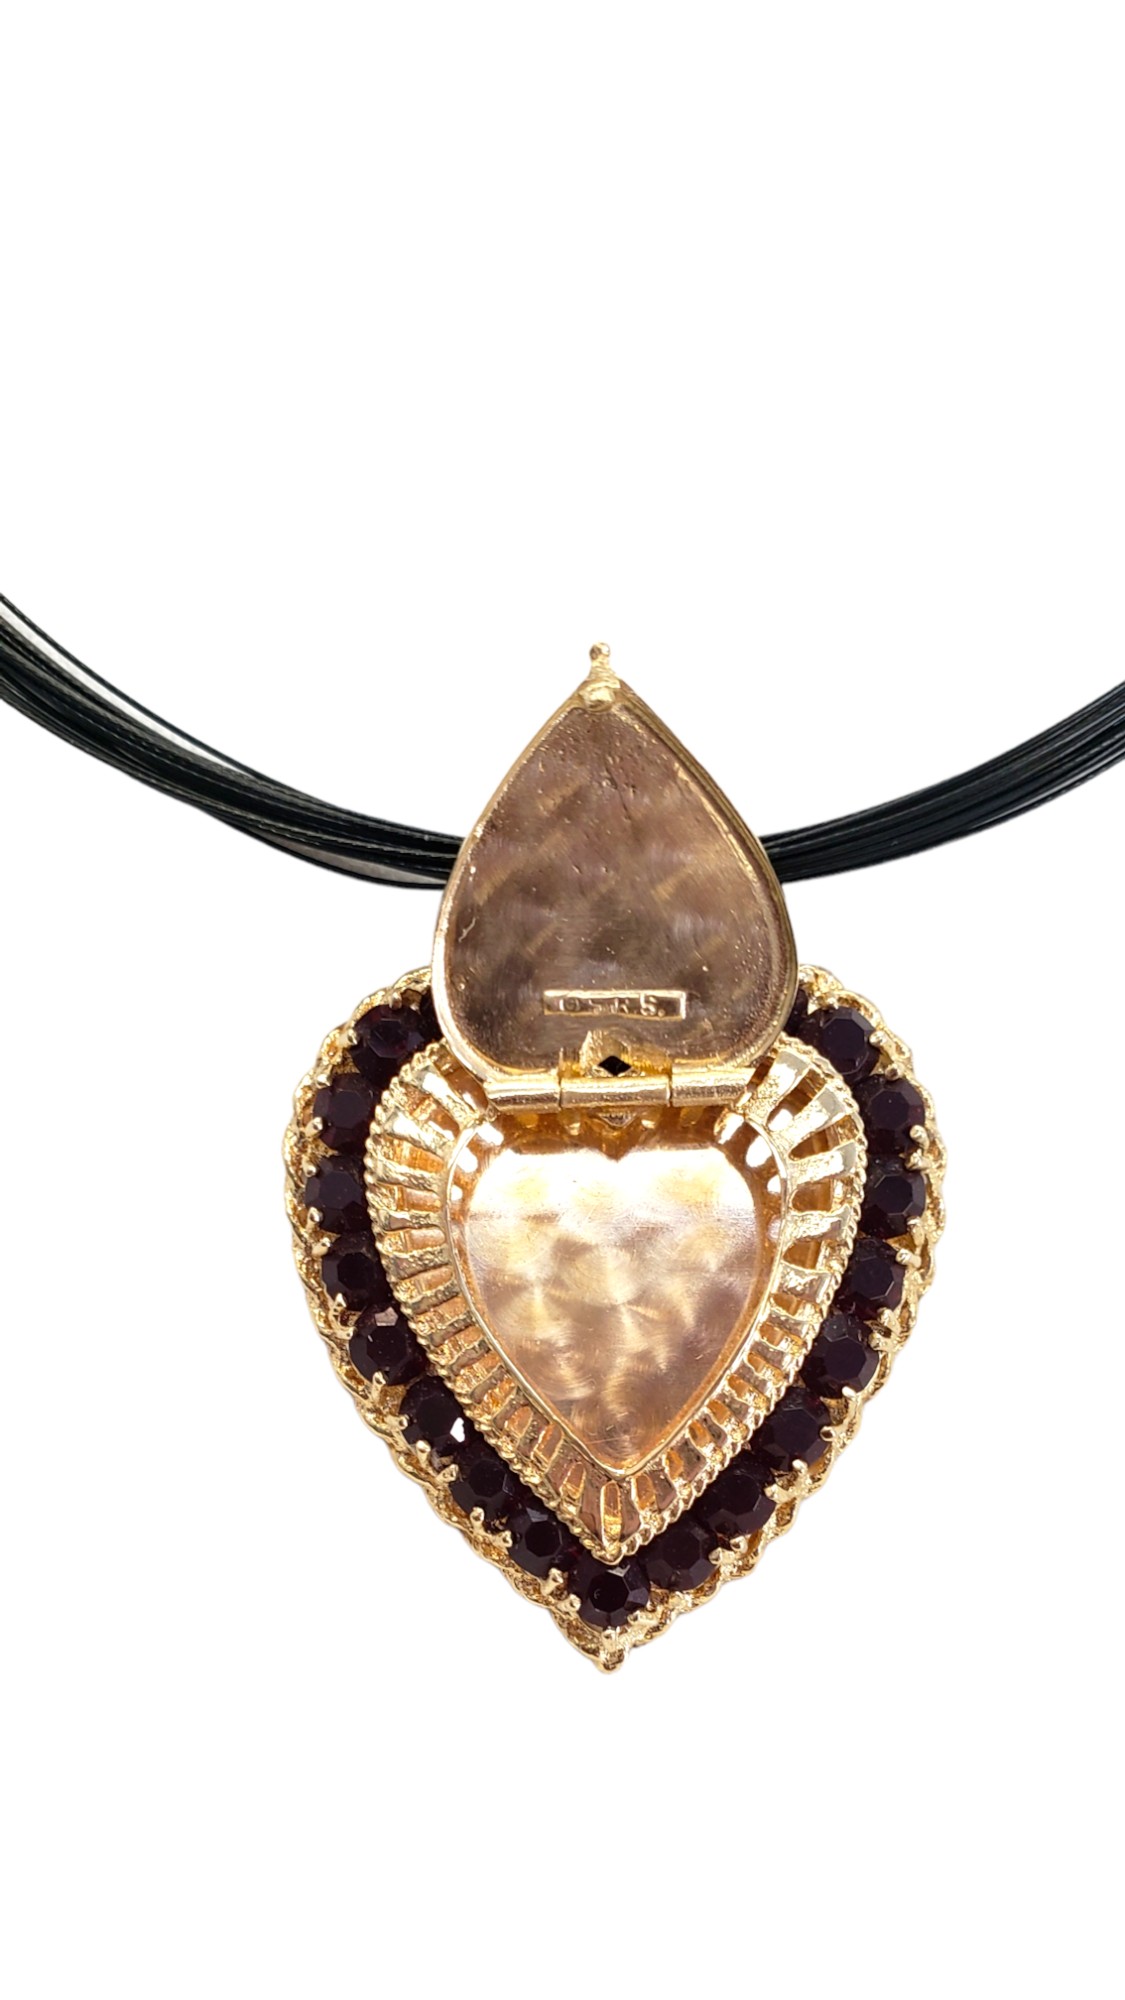 Heart Locket Necklace with Garnet Stones, 14k Yellow Gold